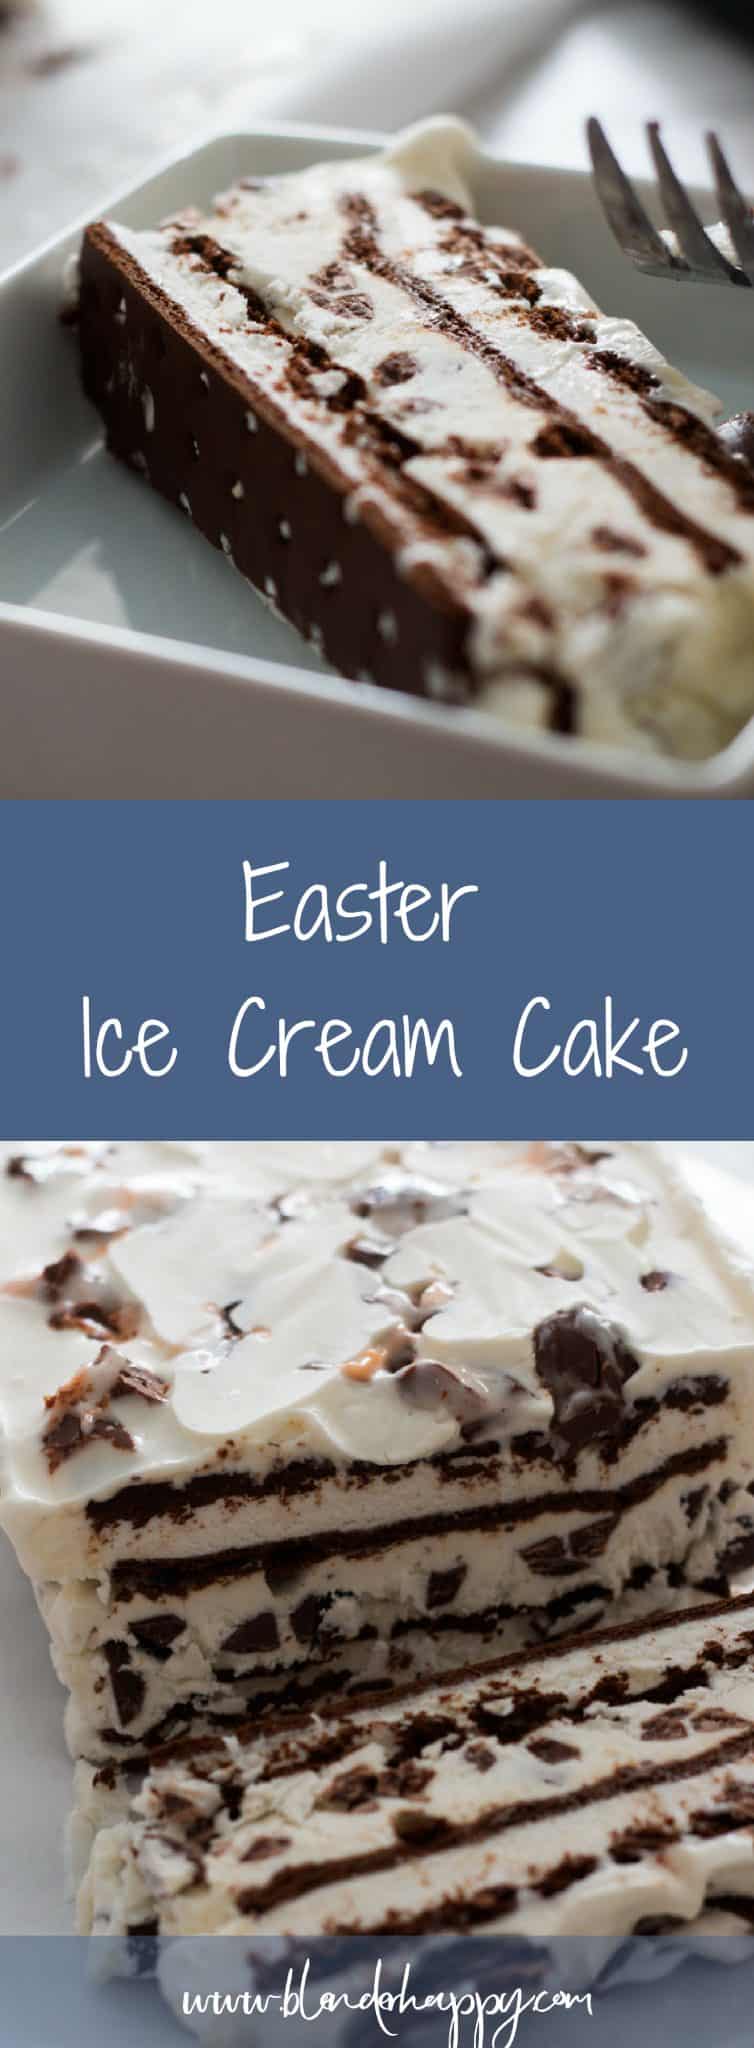 Easter Ice Cream Cake Made At Home Blender Happy 